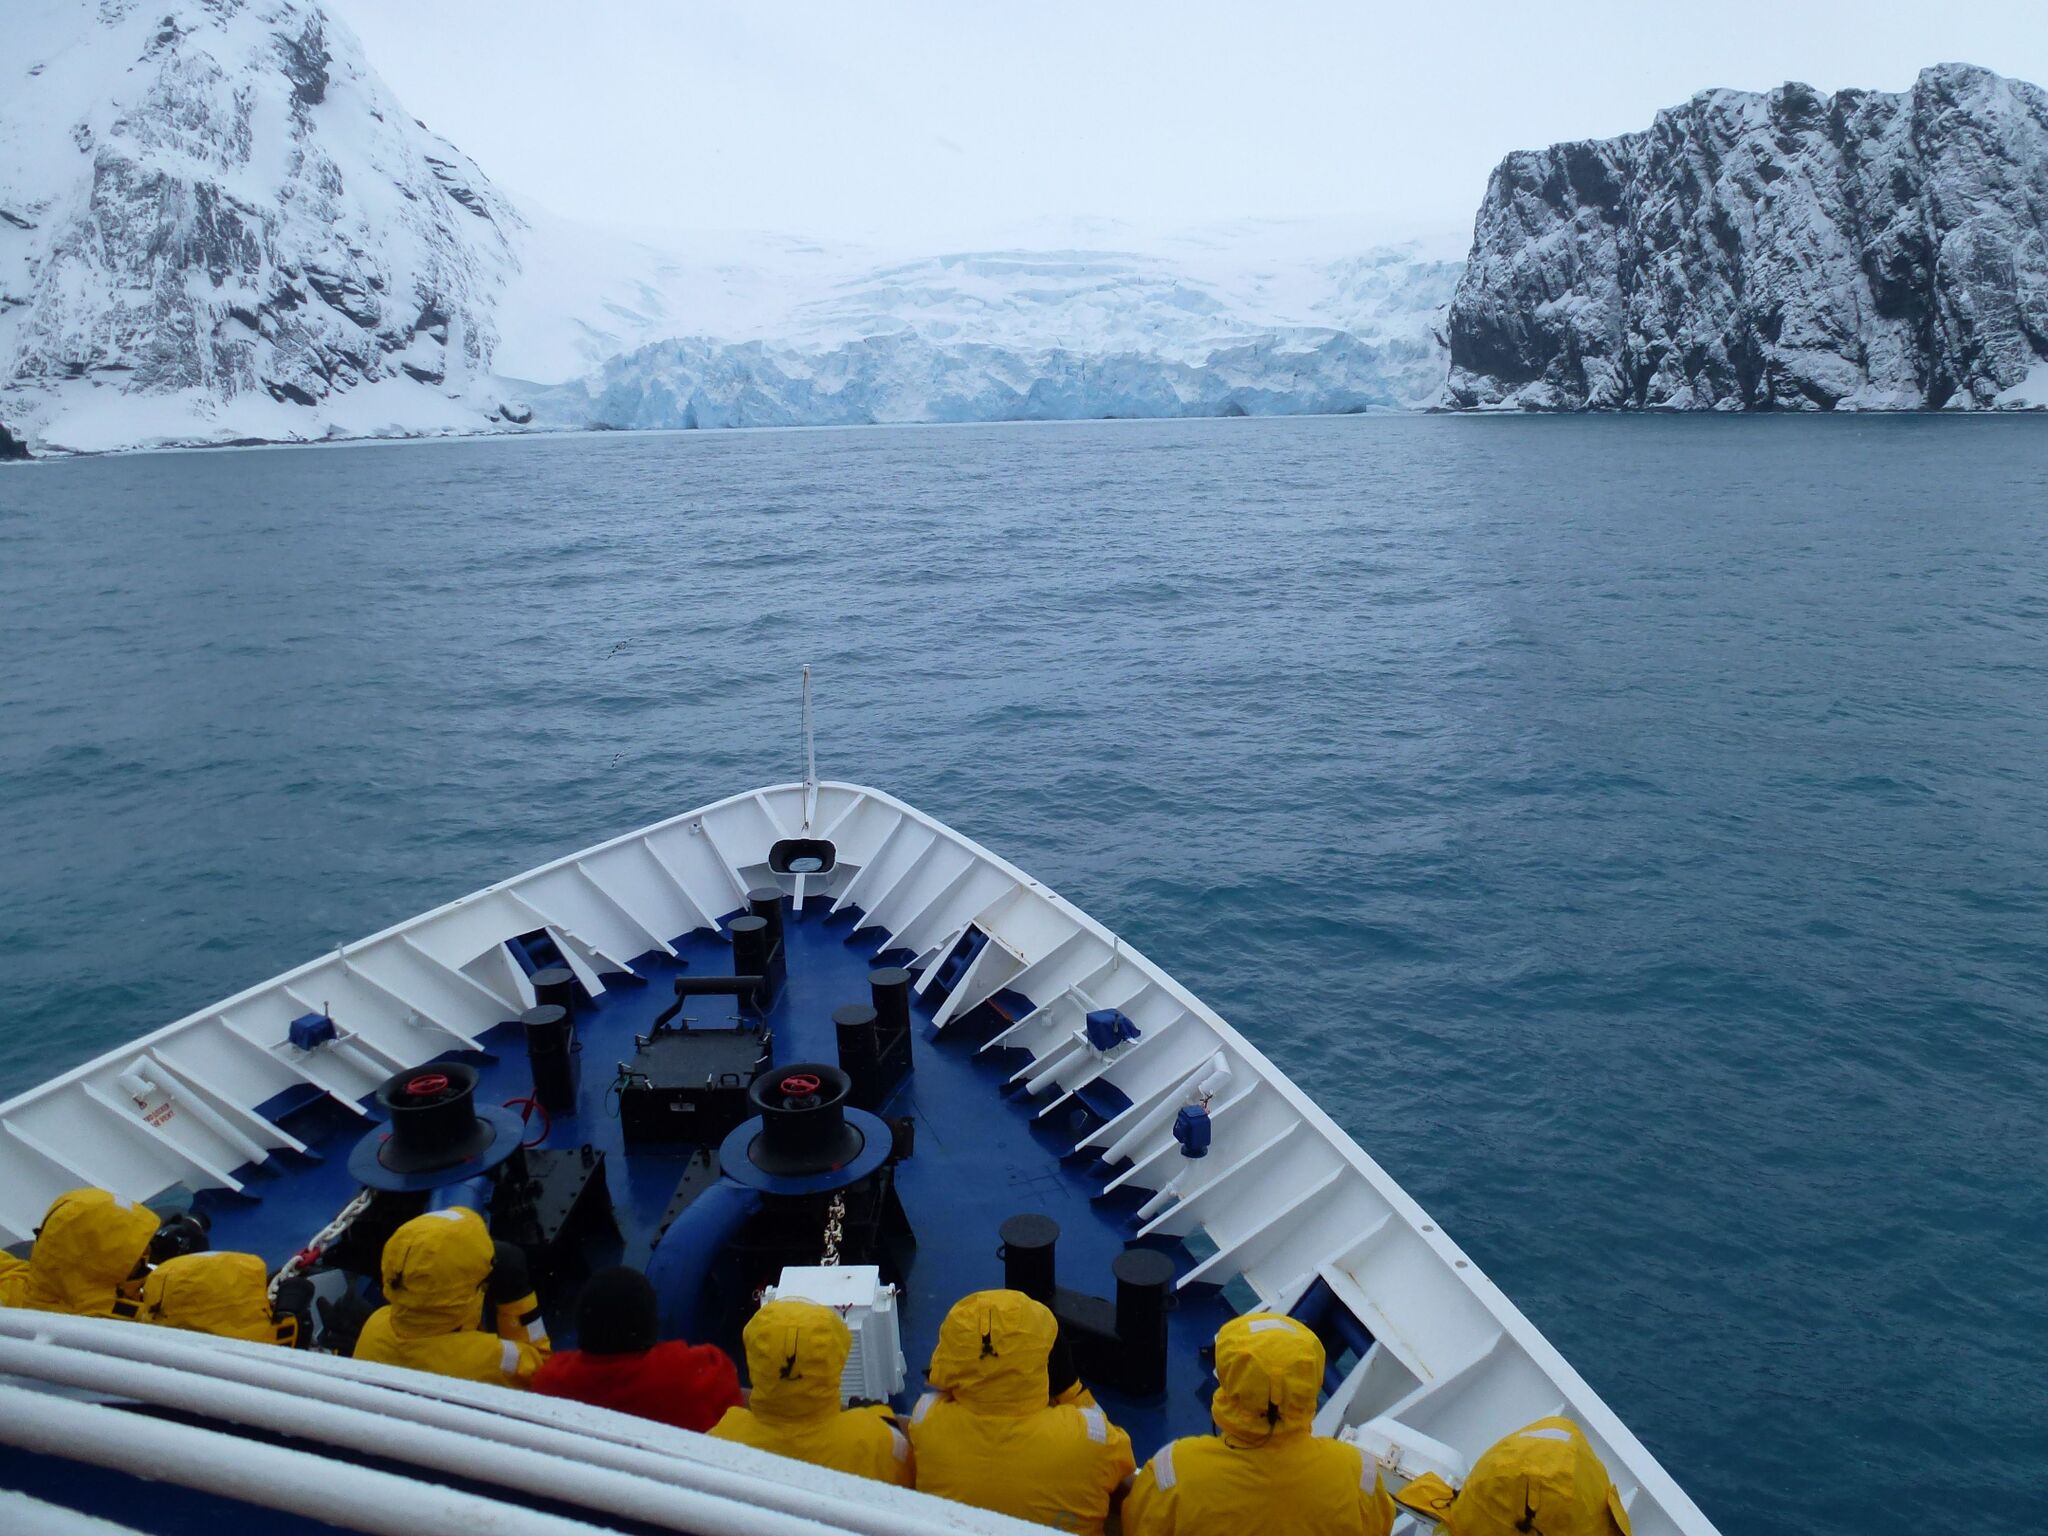 Quark Expeditions guests take in their Antarctic surroundings from the deck of their polar vessel.